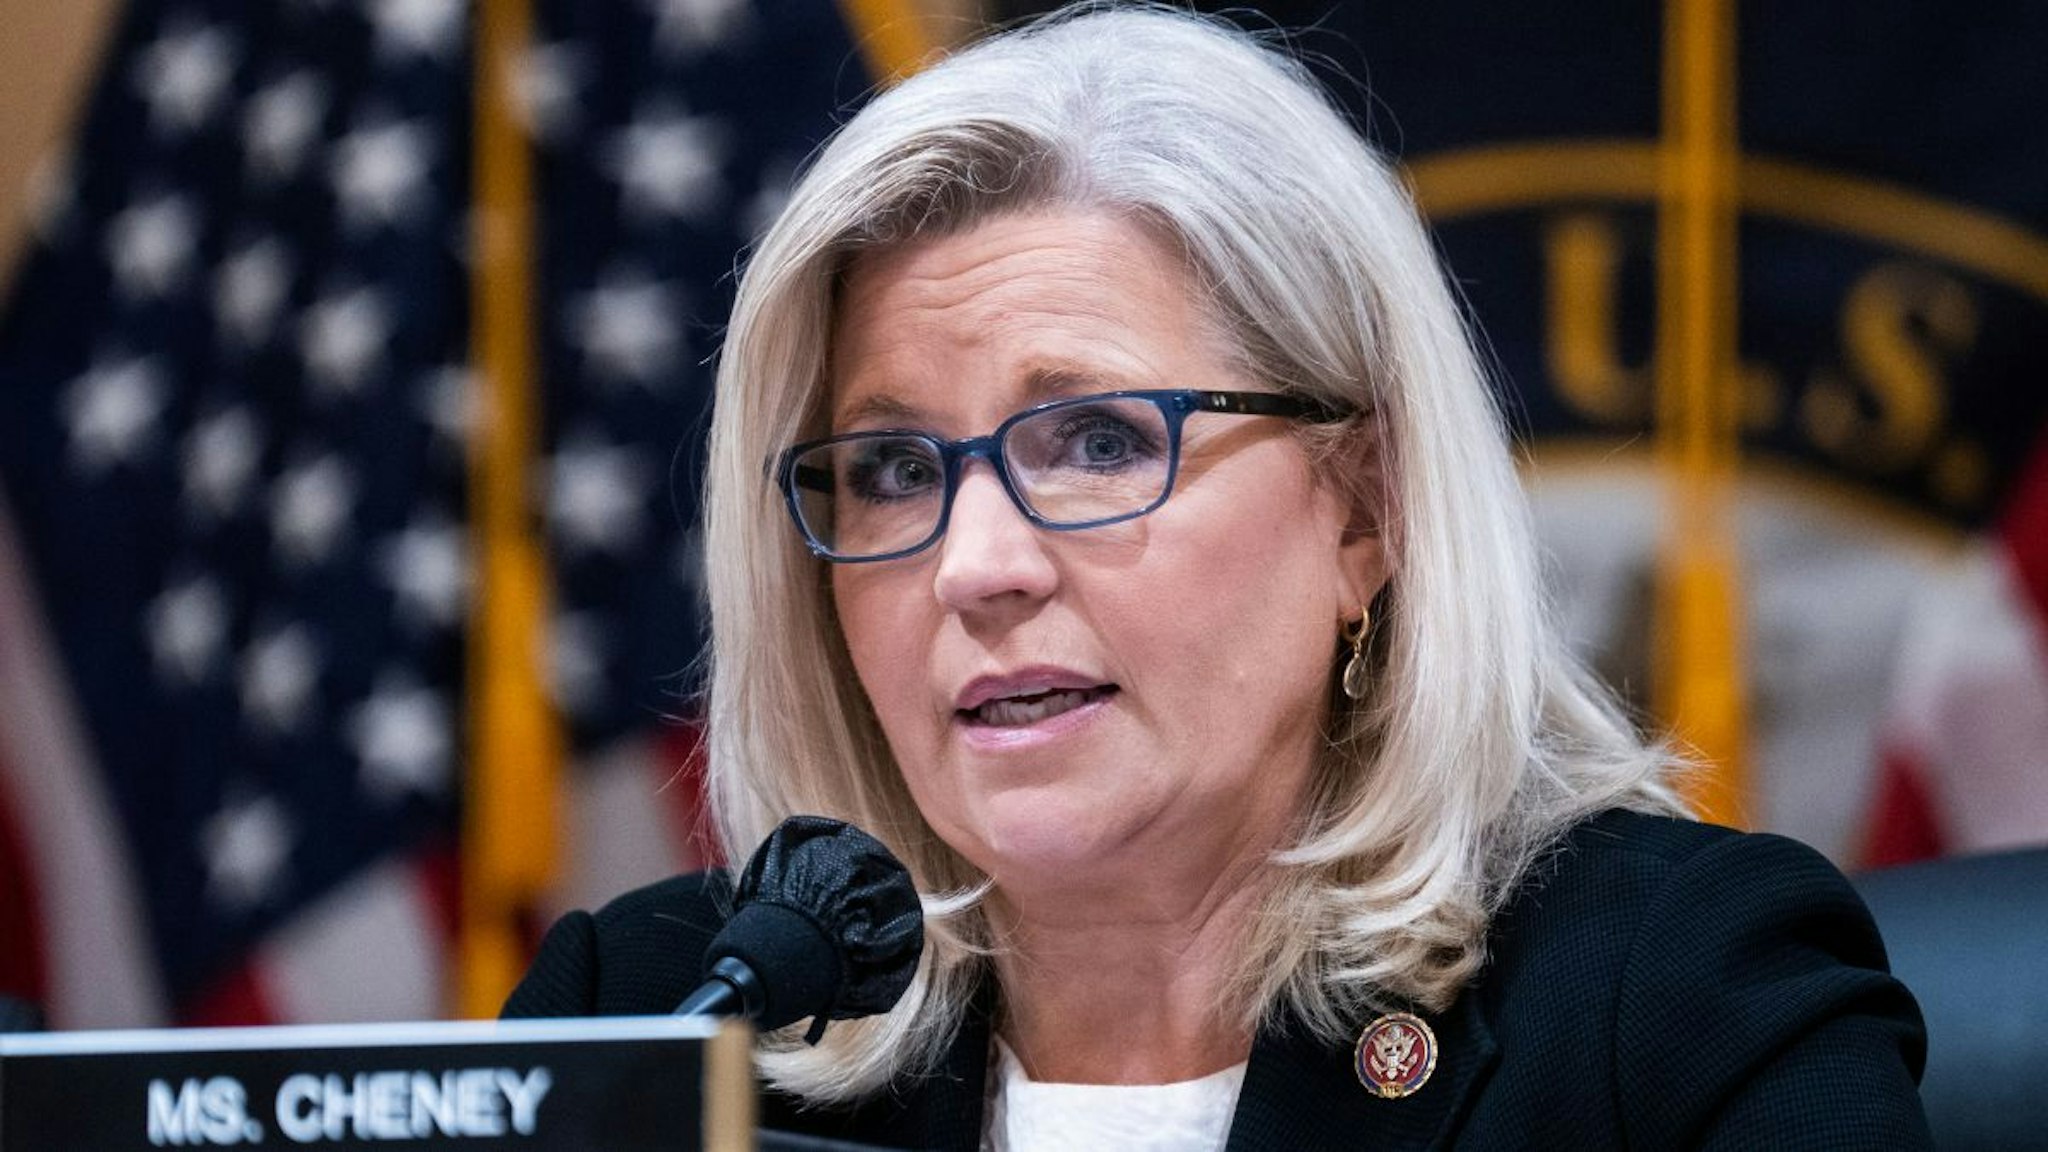 Vice chair Rep. Liz Cheney, R-Wyo., speaks during the Select Committee to Investigate the January 6th Attack on the United States Capitol hearing to present previously unseen material and hear witness testimony in Cannon Building, on Tuesday, July 12, 2022.